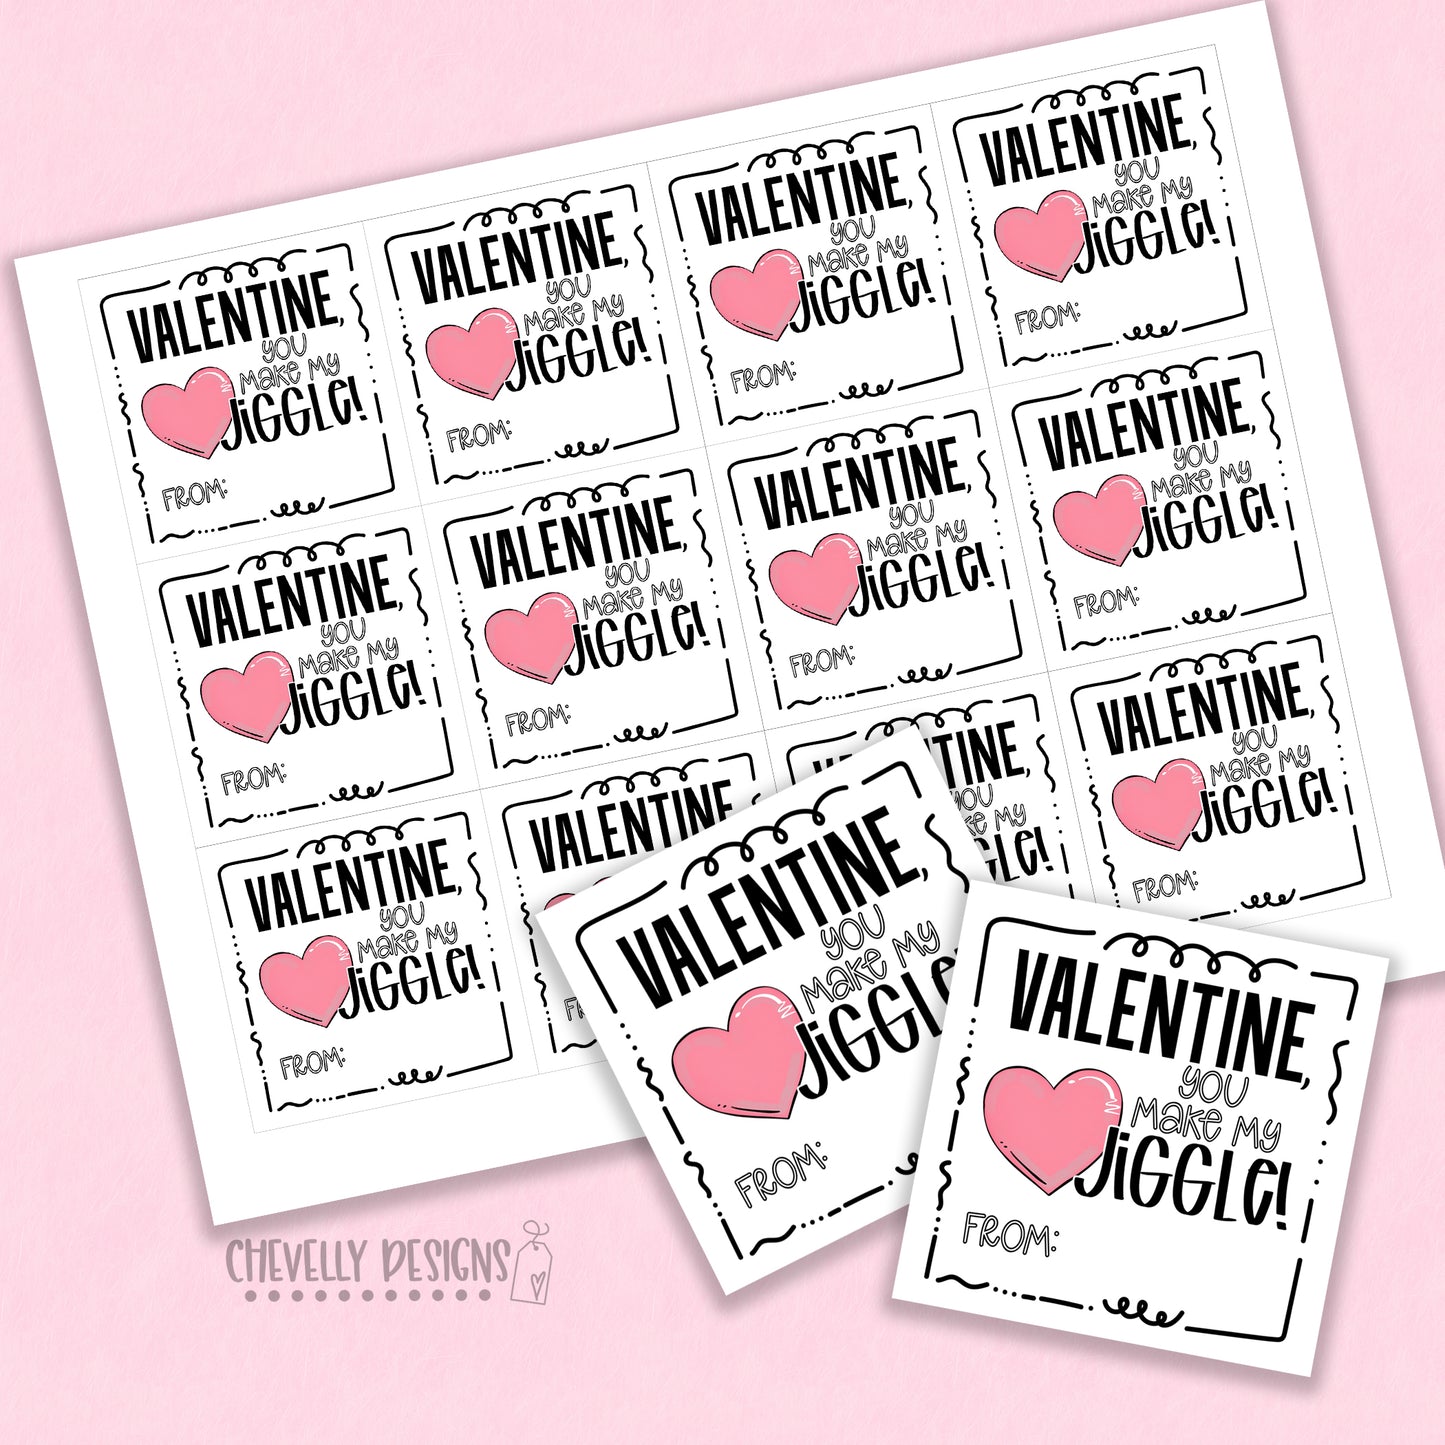 Printable Valentine Tags for Jello Snack Packs >>>Instant Digital Download<<<